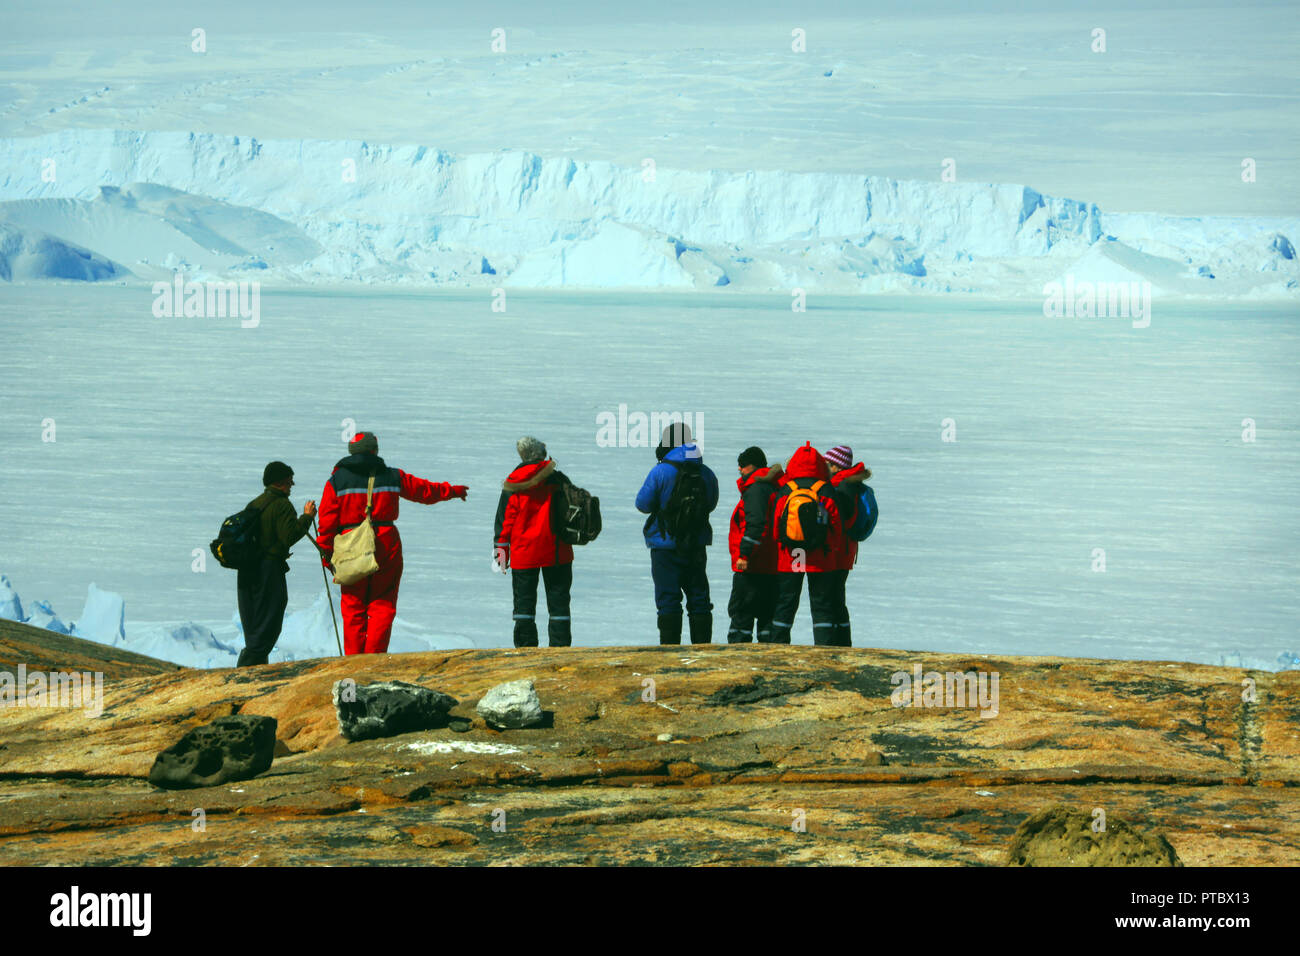 Antarctica  March 23, 2016:People, scientists, researchers are on the mountain of stone. Near the shore of the ocean and icebergs. Antarctic. Stock Photo